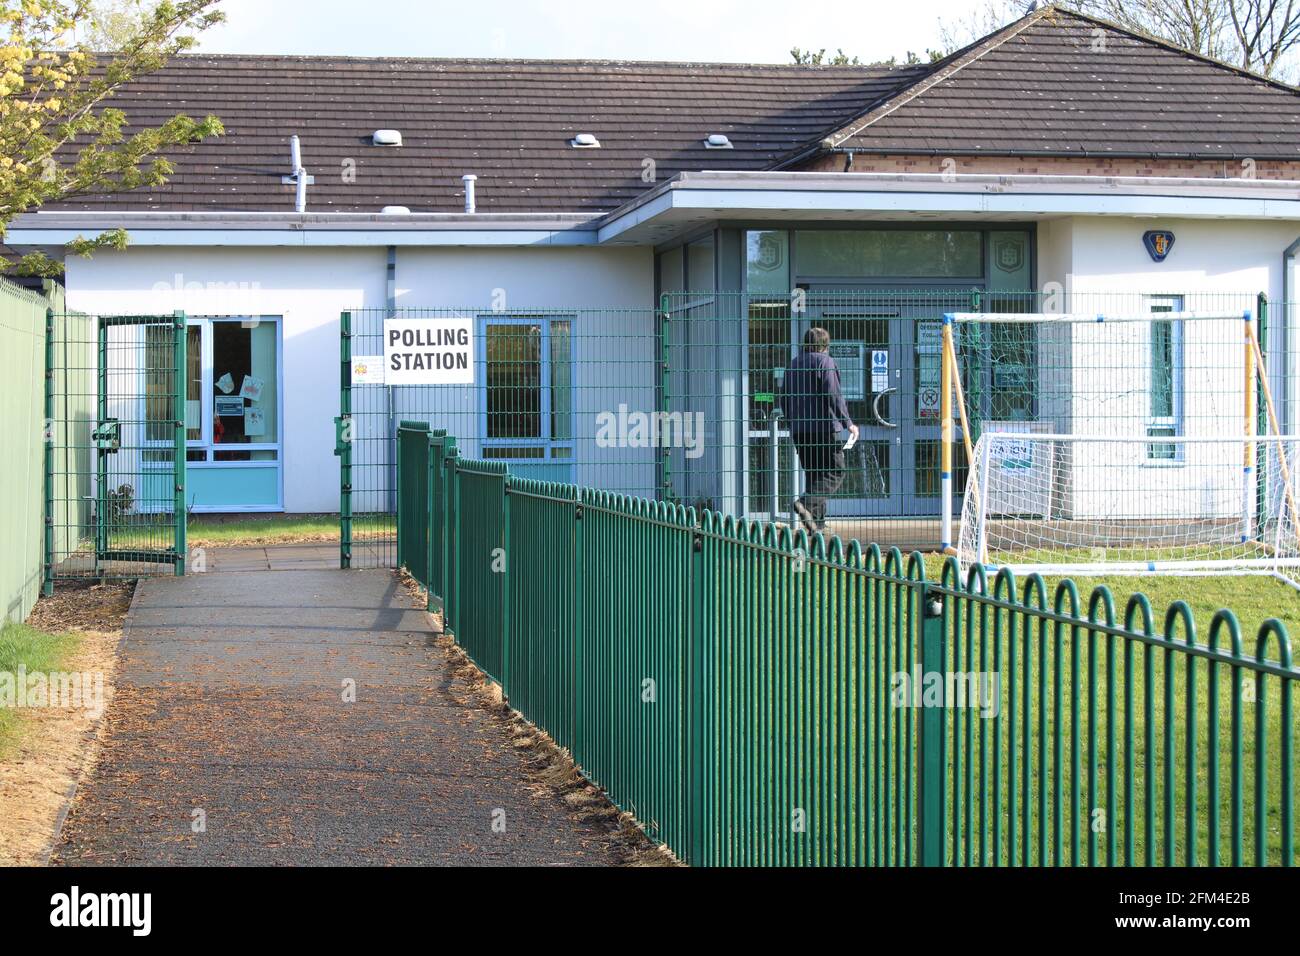 School being used as polling station with rear view of a man about to enter the building Stock Photo